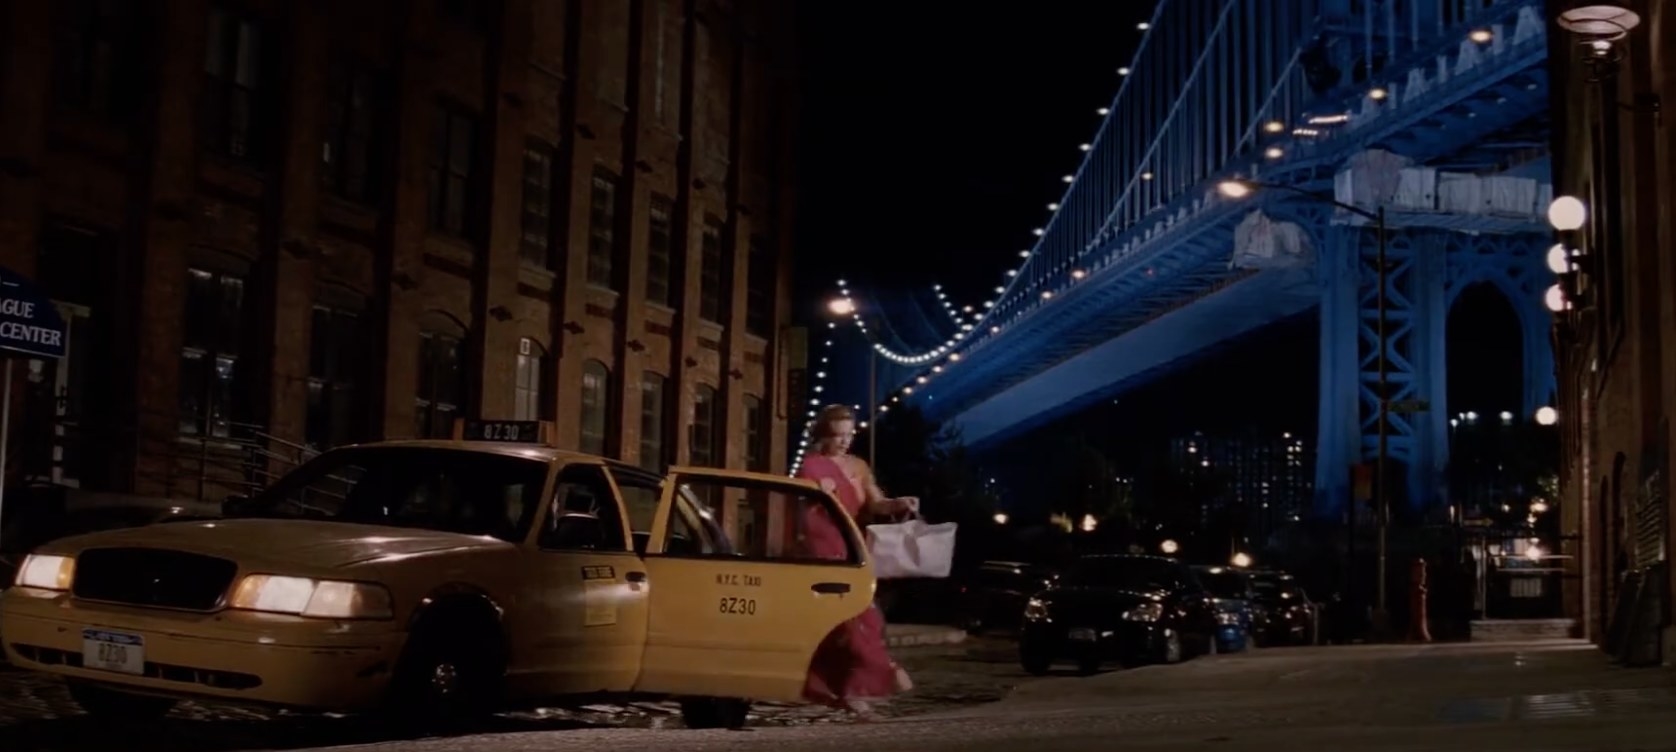 27 dresses getting out of cab at night